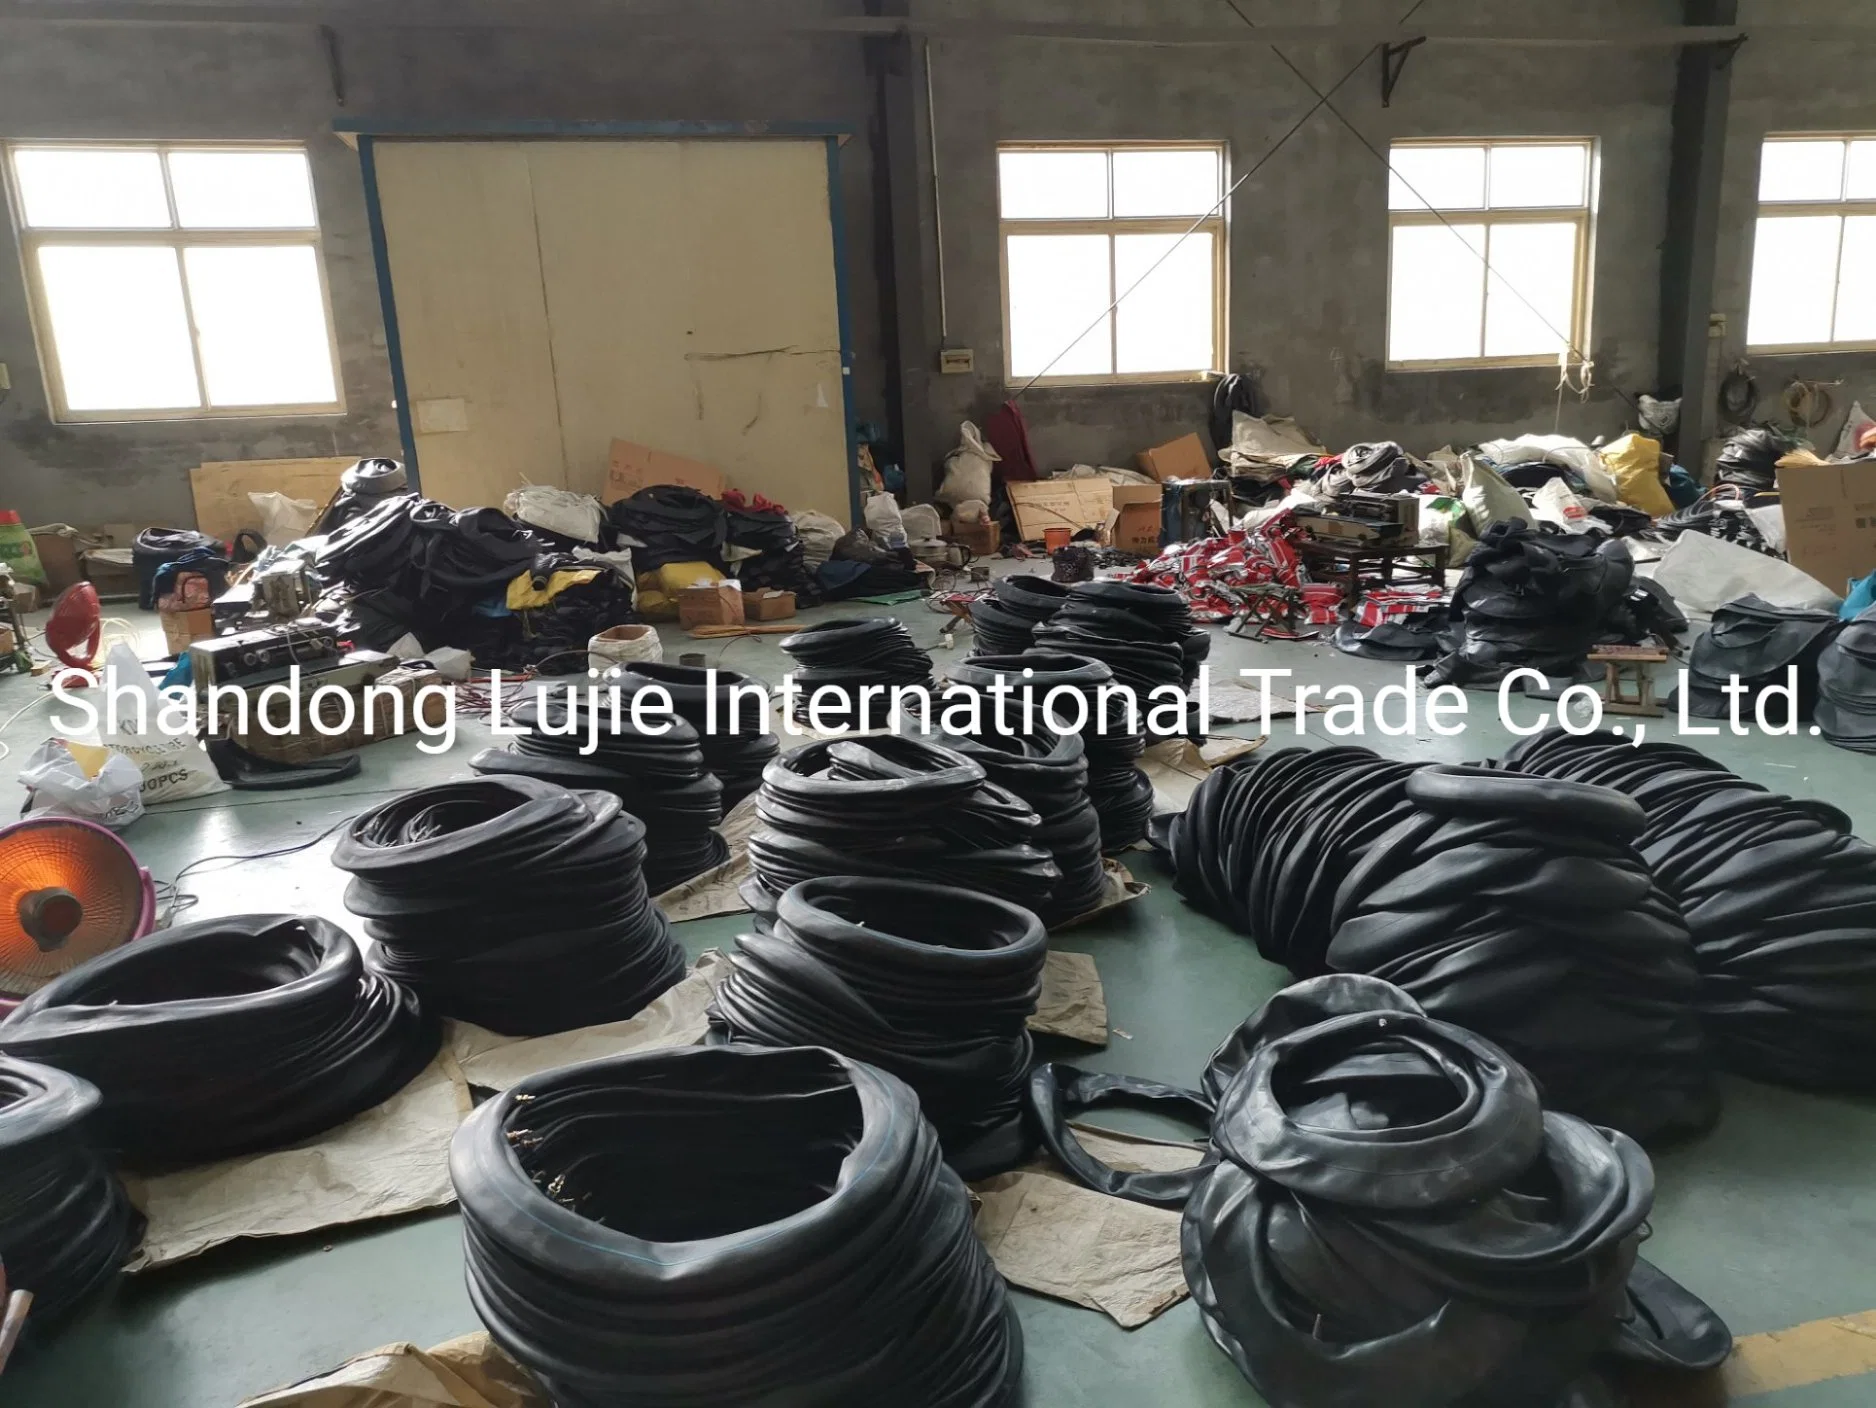 300-18 275-17 275-18 300-17 110/90-16 ISO Standard 18 Inch Butyl Natural Rubber Motorcycle /Bicycle /Tricycle / Car /Truck Camera Bike Motorcycle Inner Tube

300-18 275-17 275-18 300-17 110/90-16 Norme ISO 18 pouces Chambre à air en caoutchouc naturel butyle pour moto/vélo/tricycle/voiture/camion